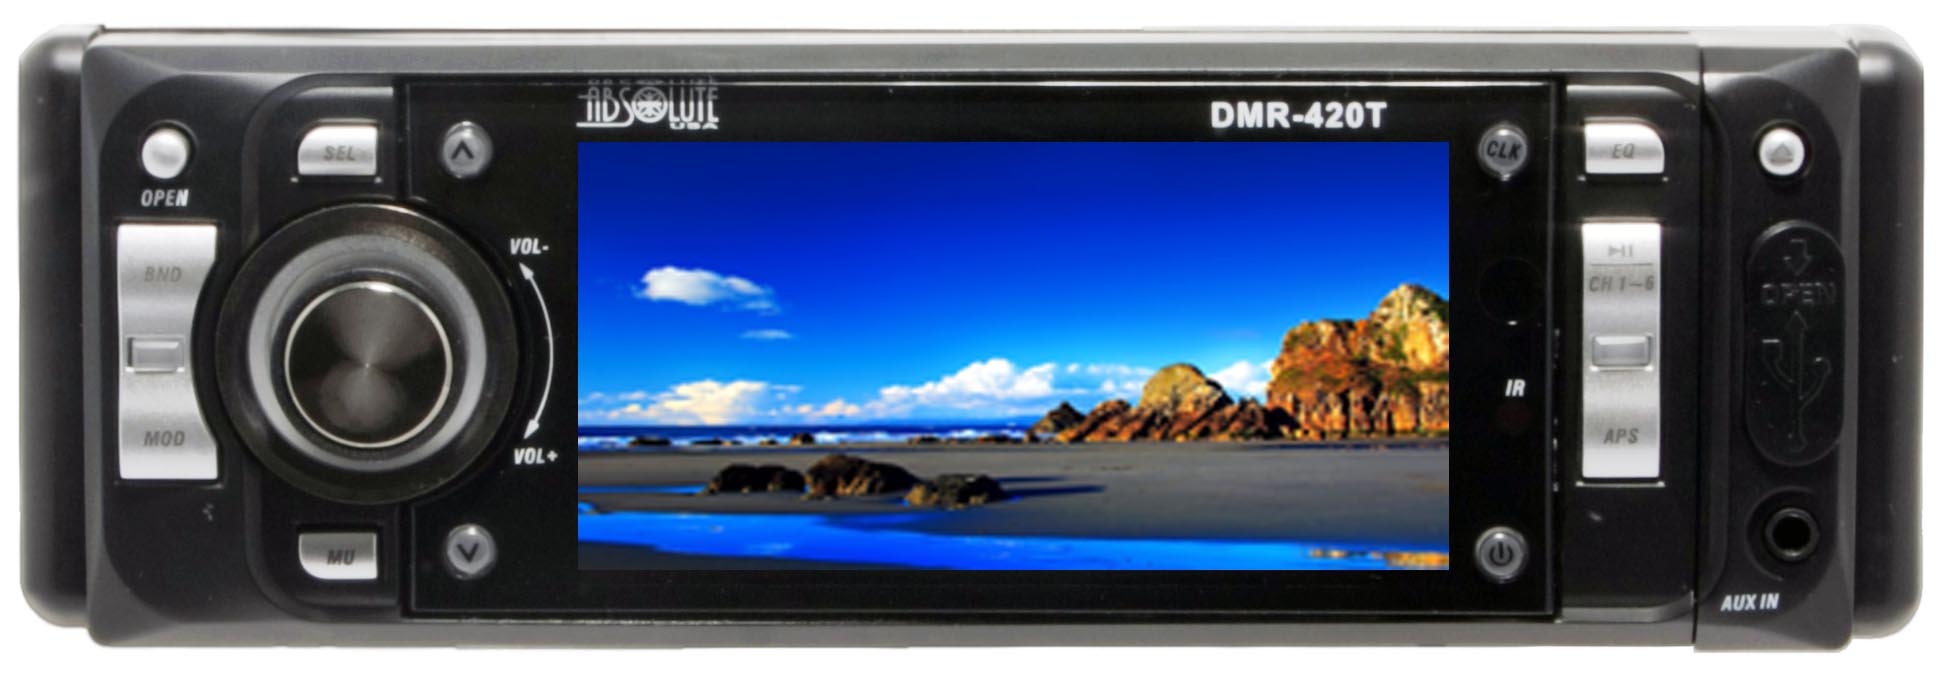 Absolute DMR-420T Single Din 4" Car Stereo<br/>One -Din In-Dash 4" TFT-LCD Monitor with DVD/CD/MP3 Receiver